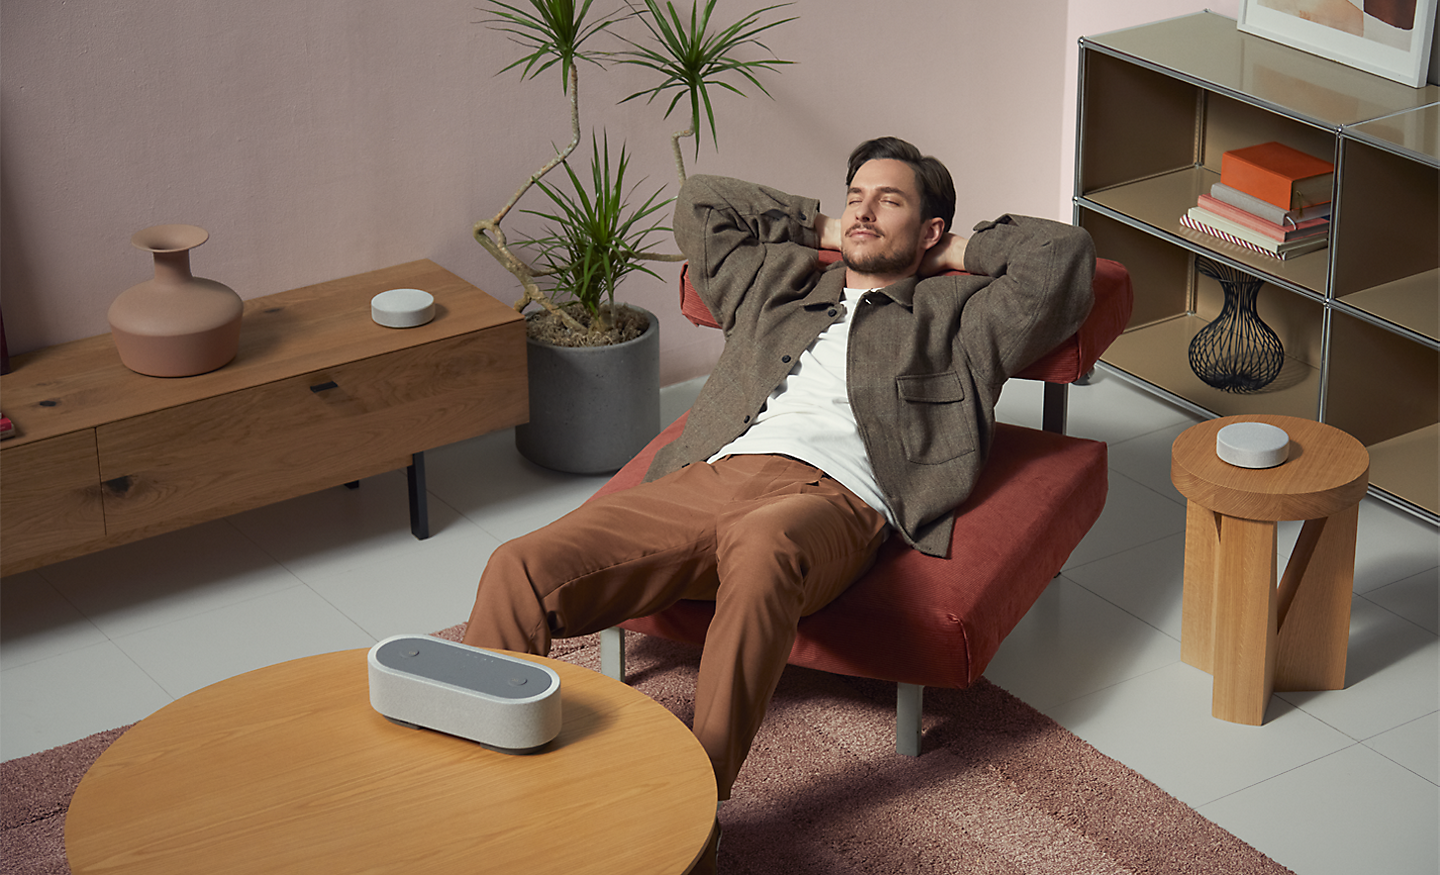 Image of a person laying on an accent chair, surrounded by the three HT-AX7 speakers